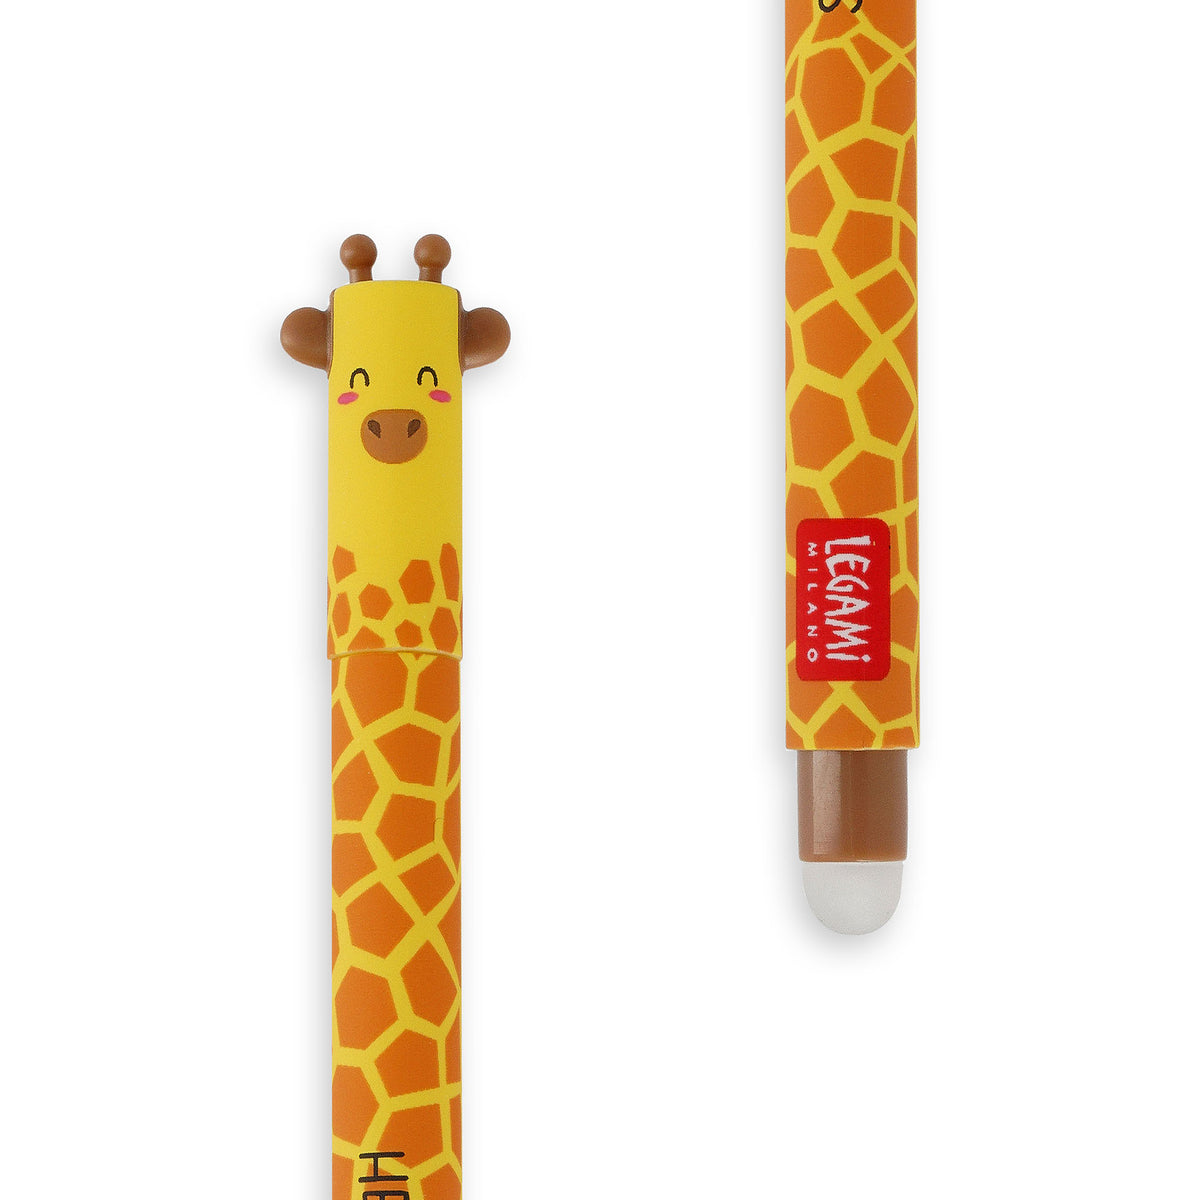 Image of an erasable pen lid and rubber in the shape of a giraffe.